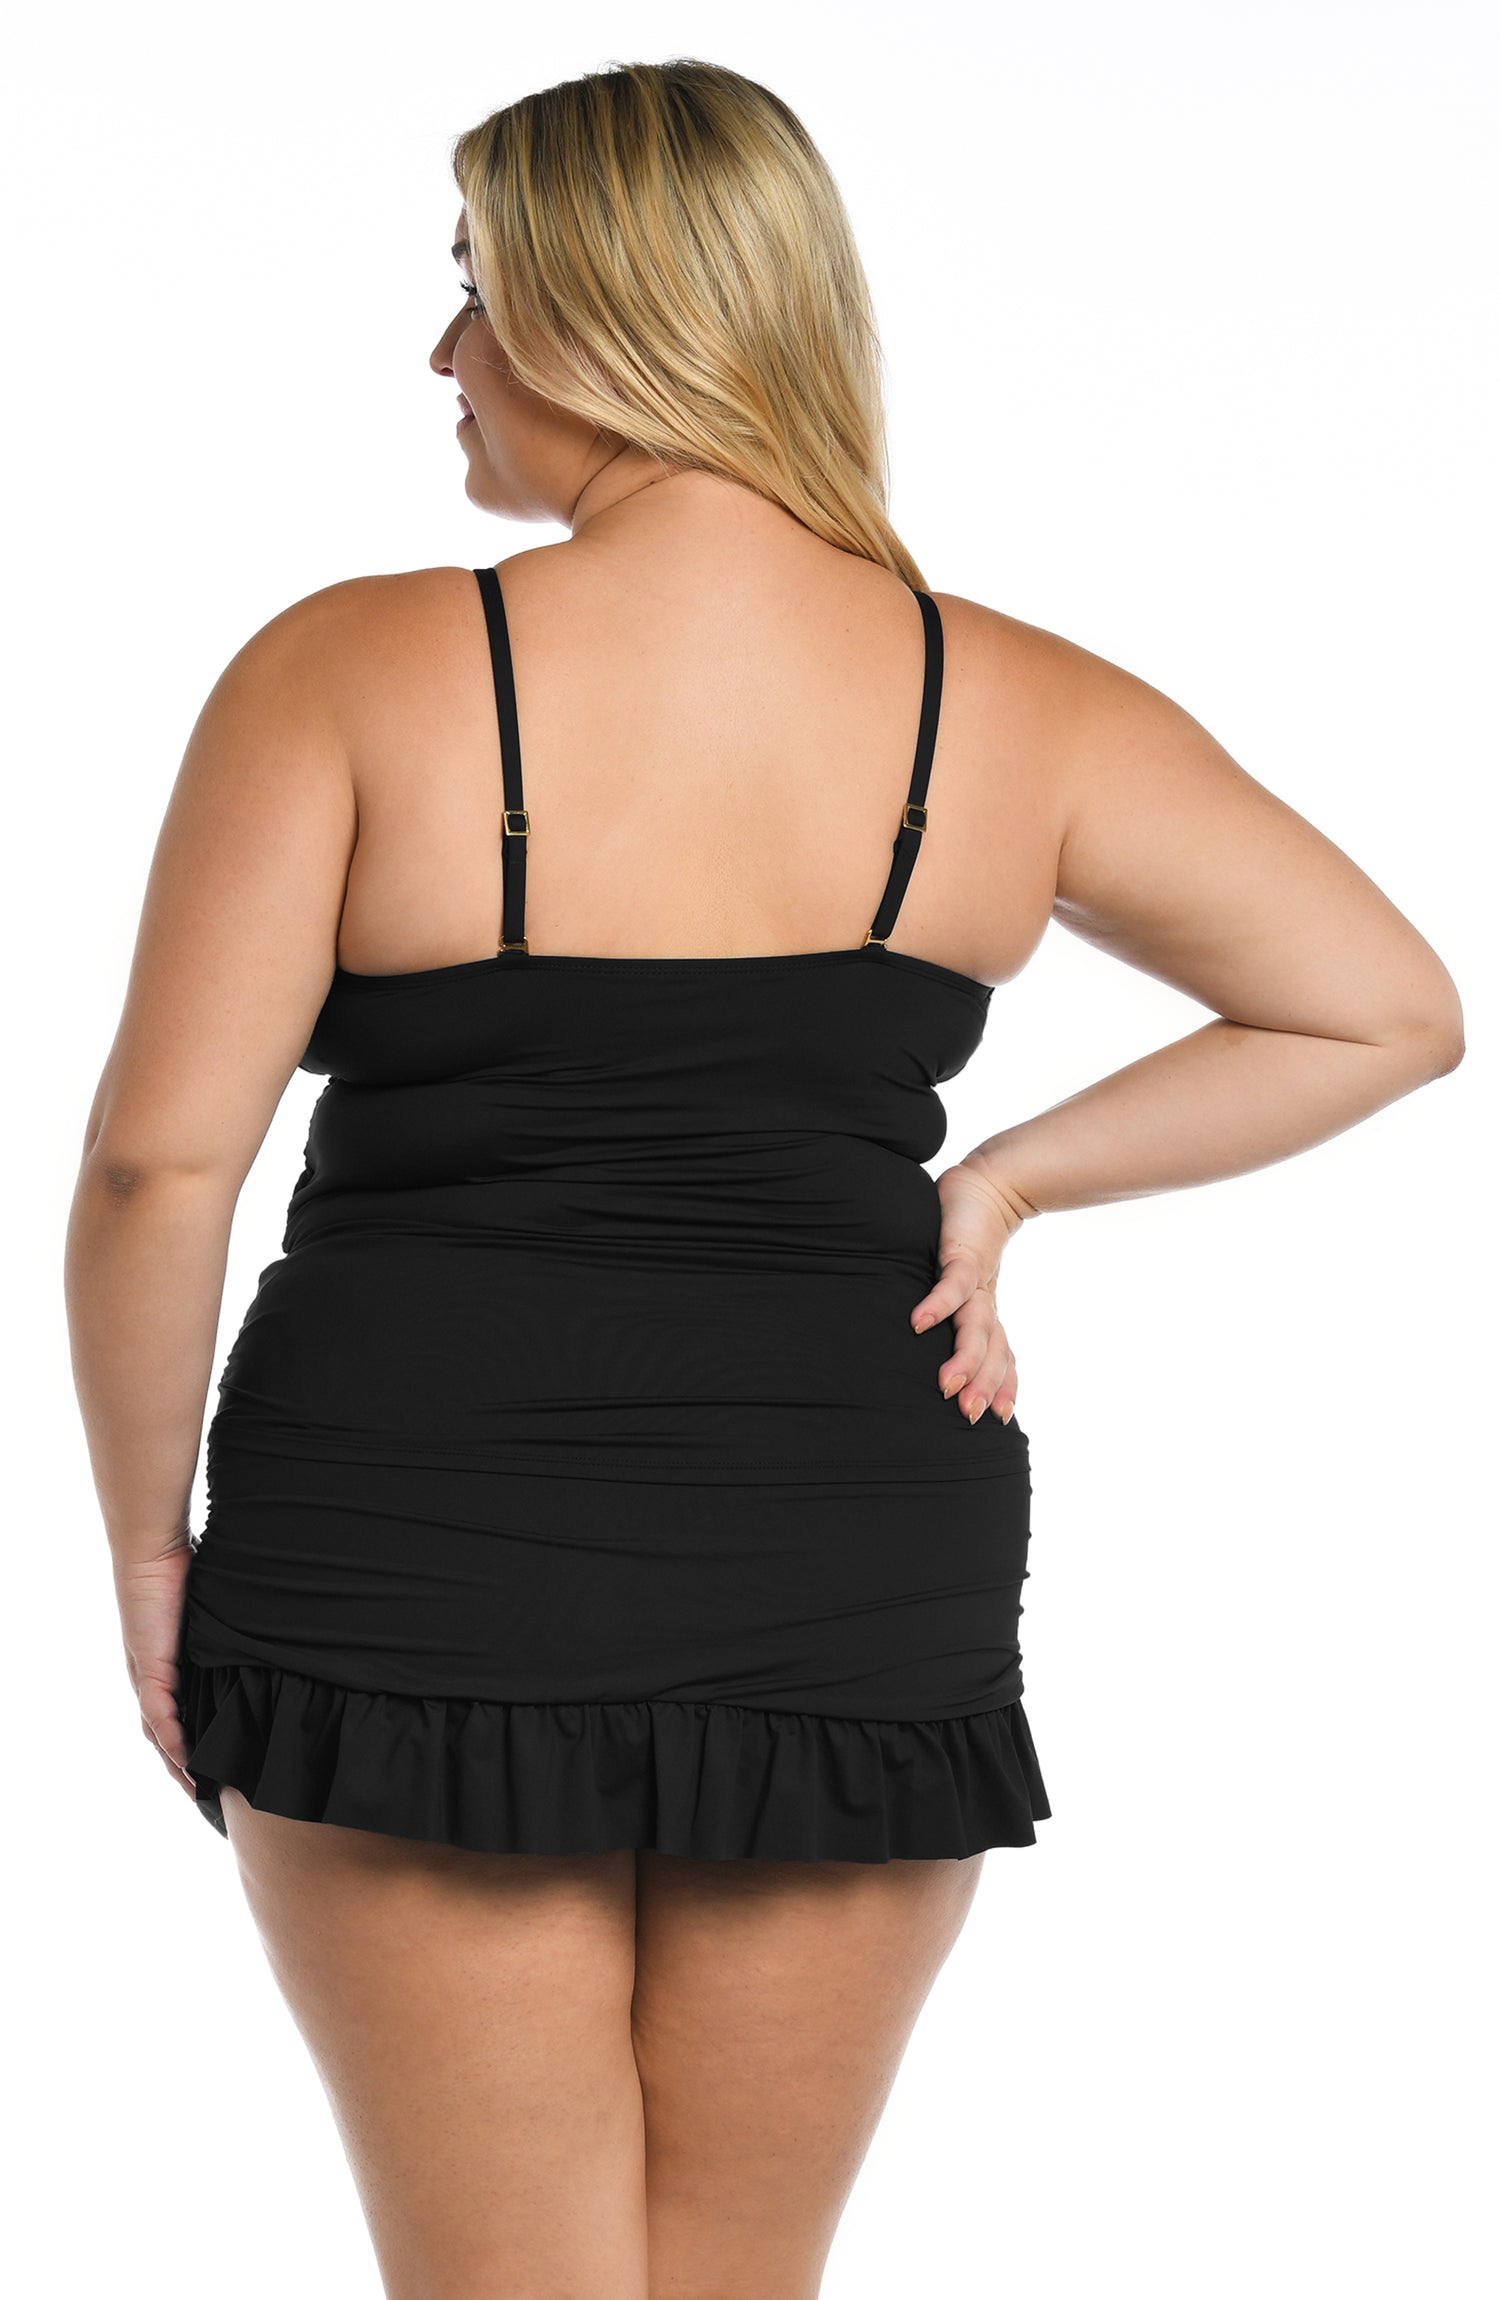 Model is wearing a black keyhole tankini swimsuit top from our Best-Selling Island Goddess collection.